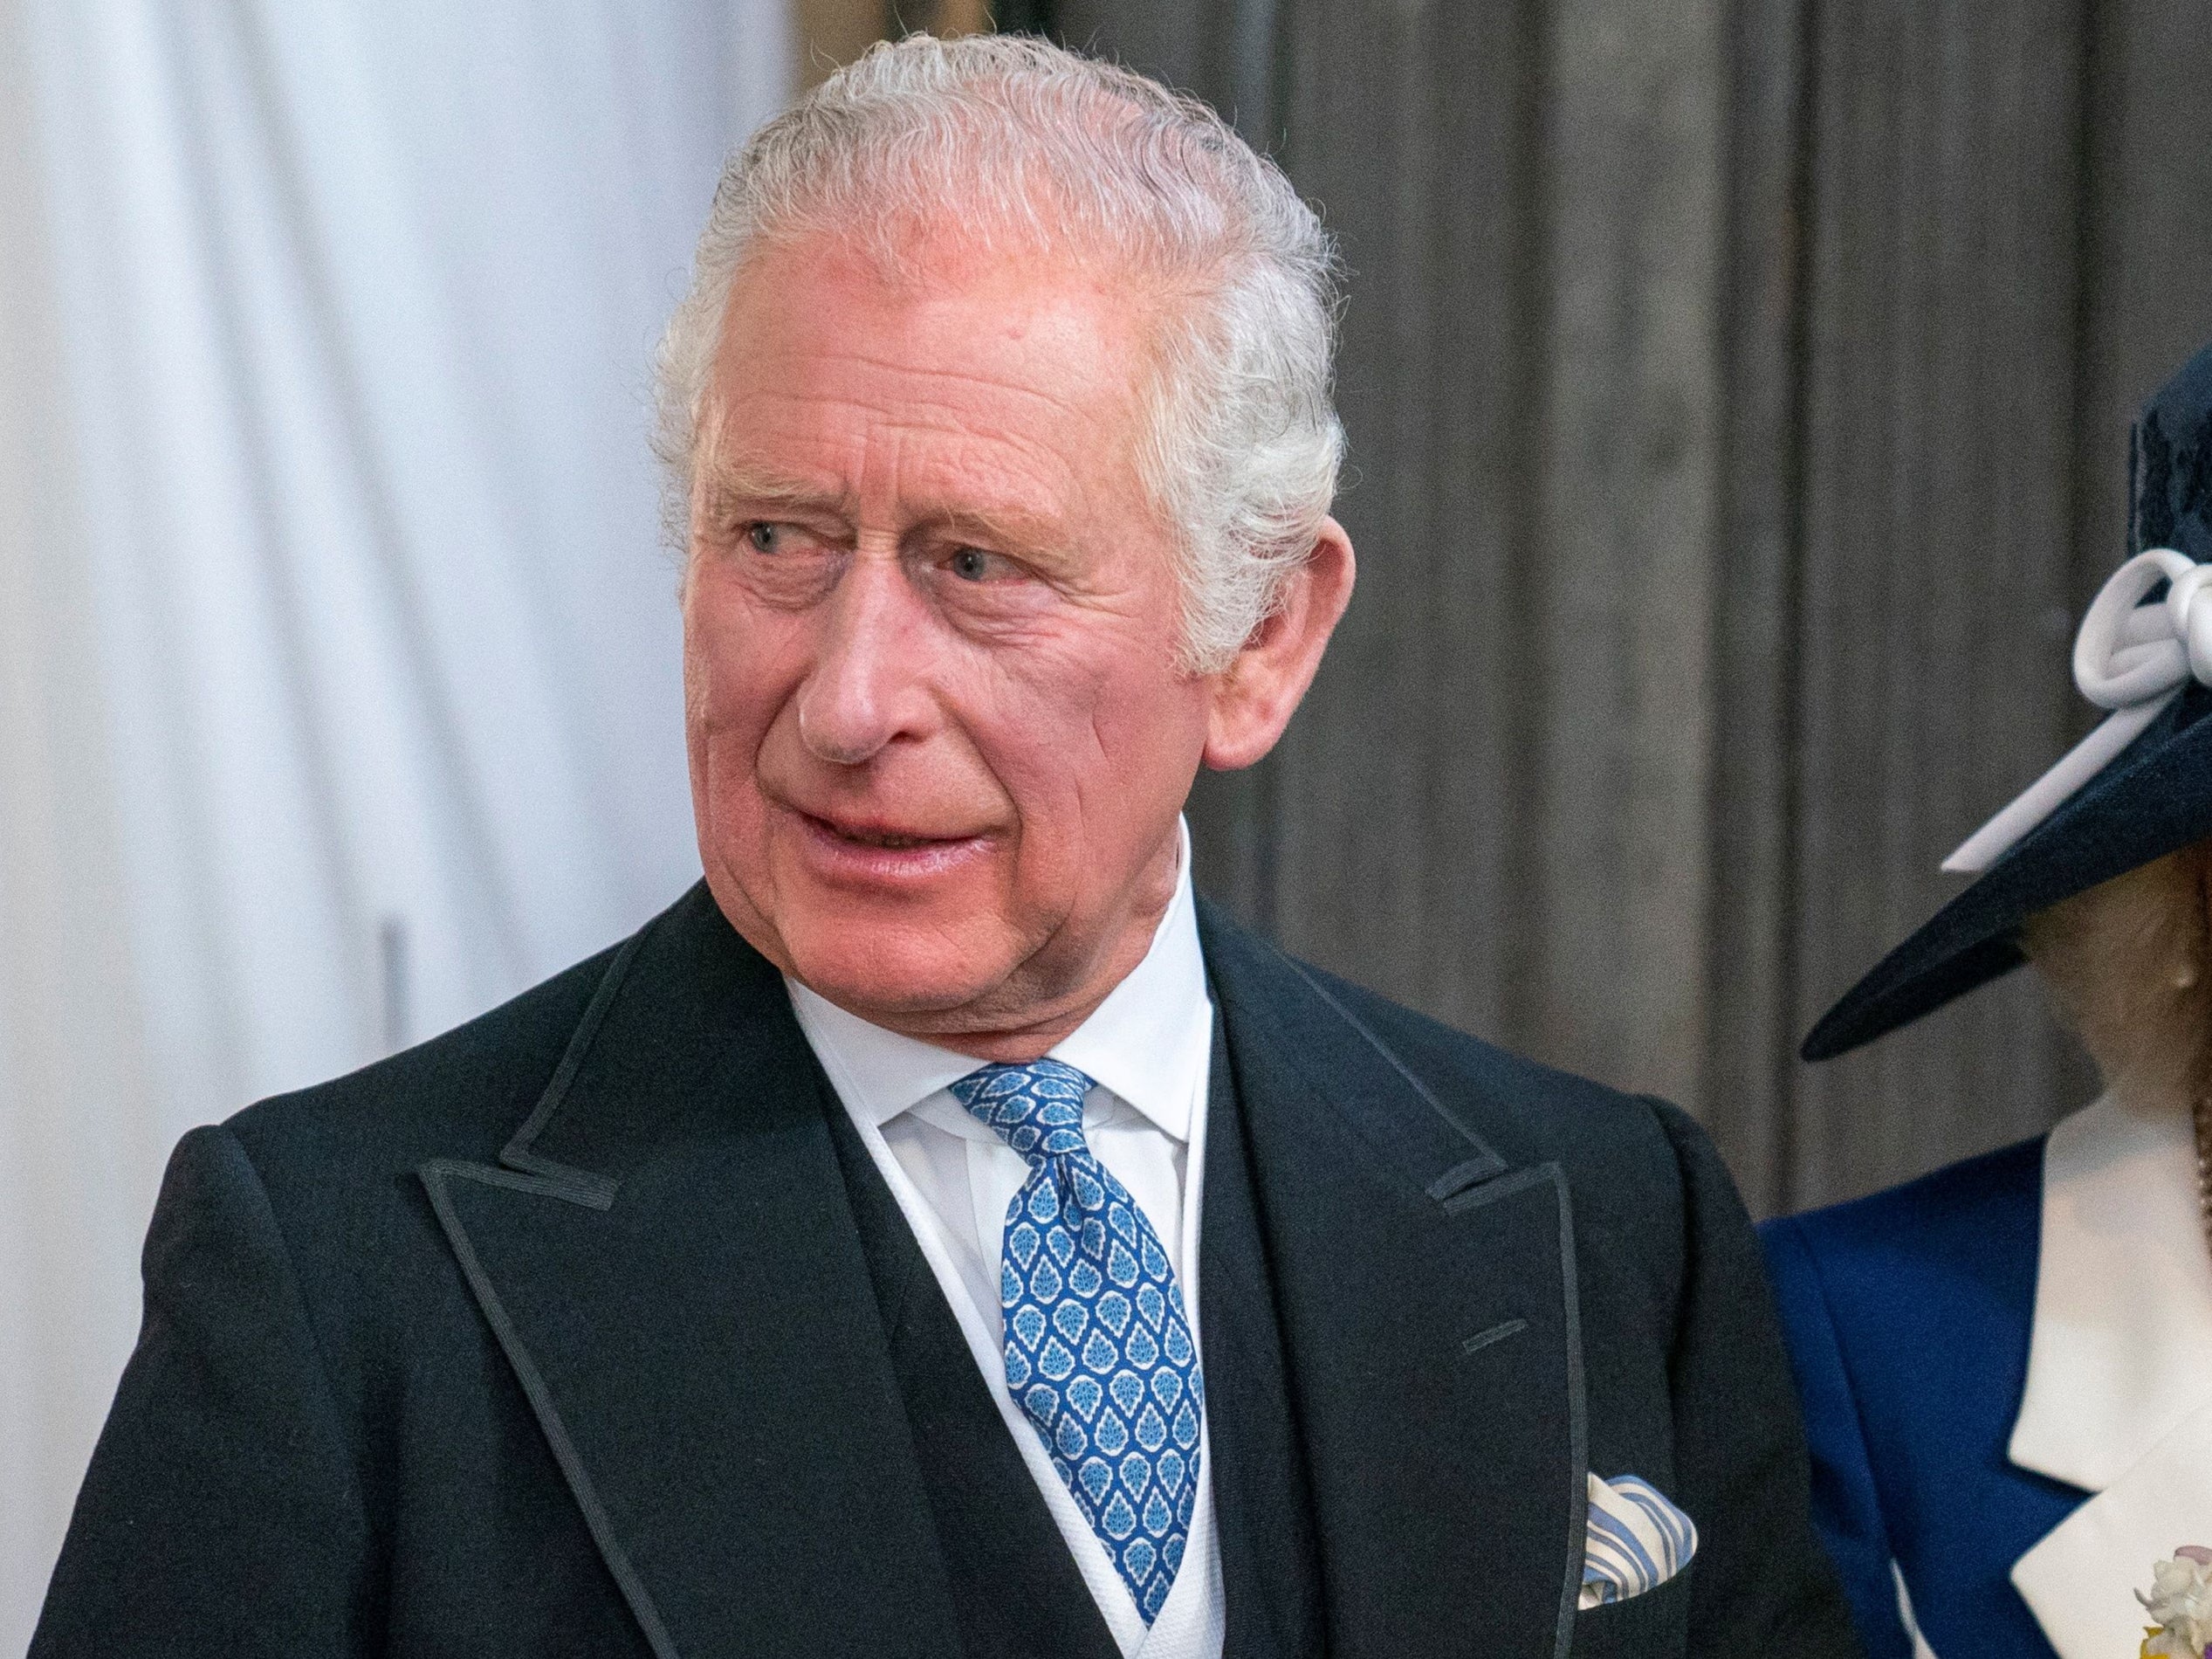 Prince Charles attends the Royal Maundy Service at St George's Chapel, in Windsor